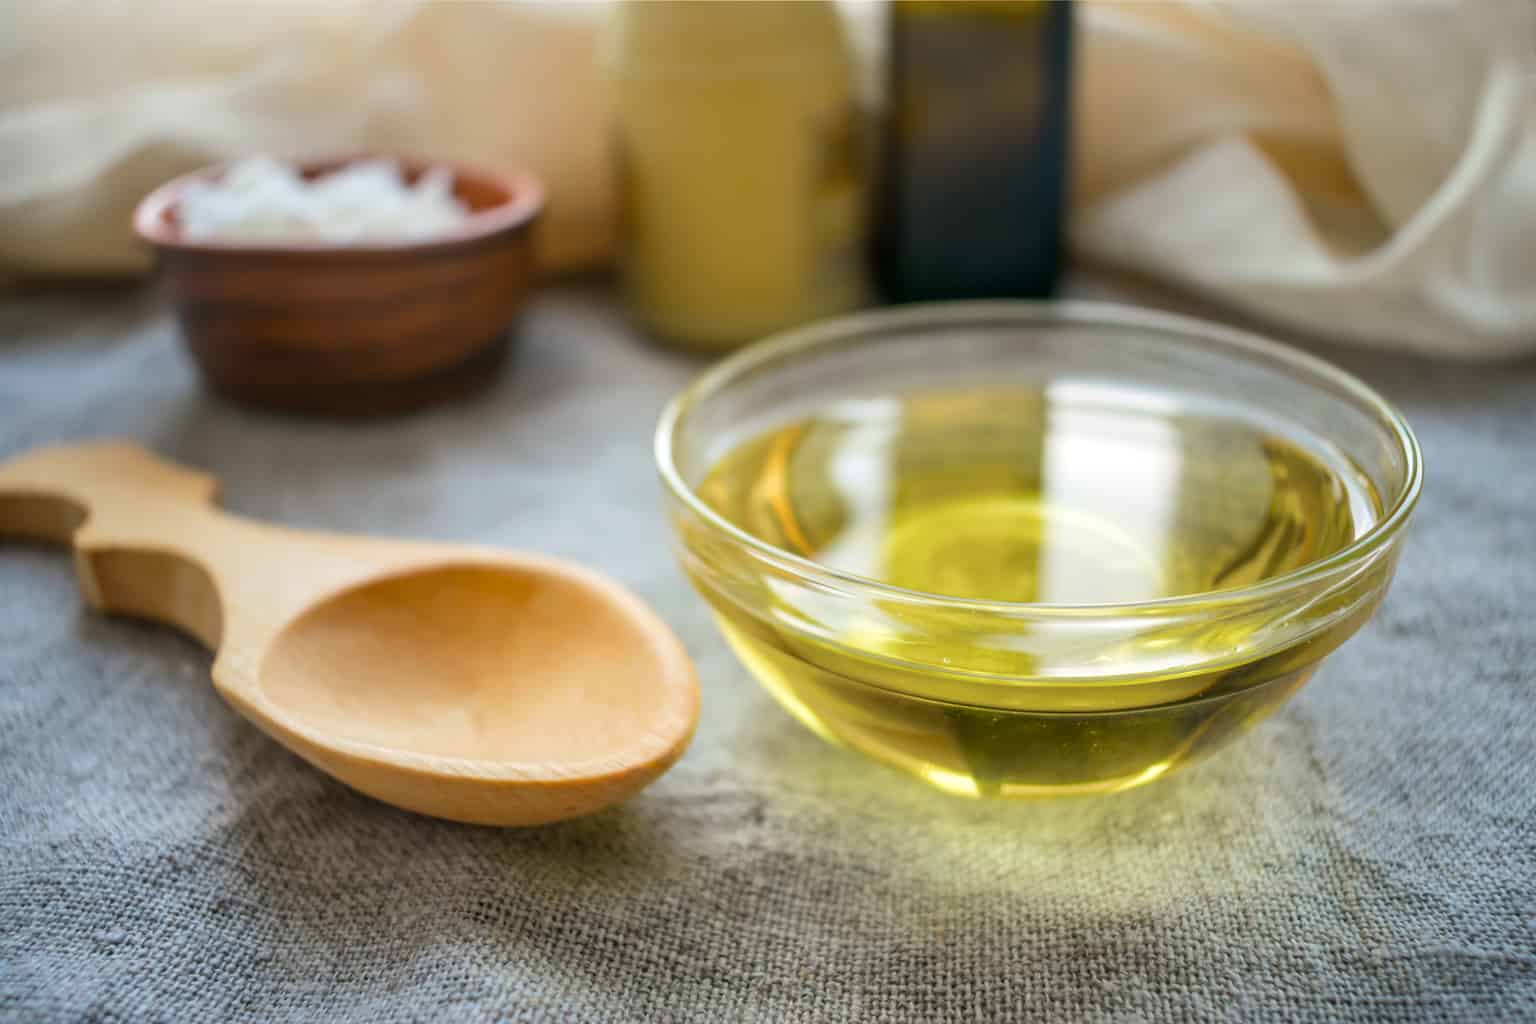 ½ Tsp of This Natural Oil Fixes “Prune Skin” Down There